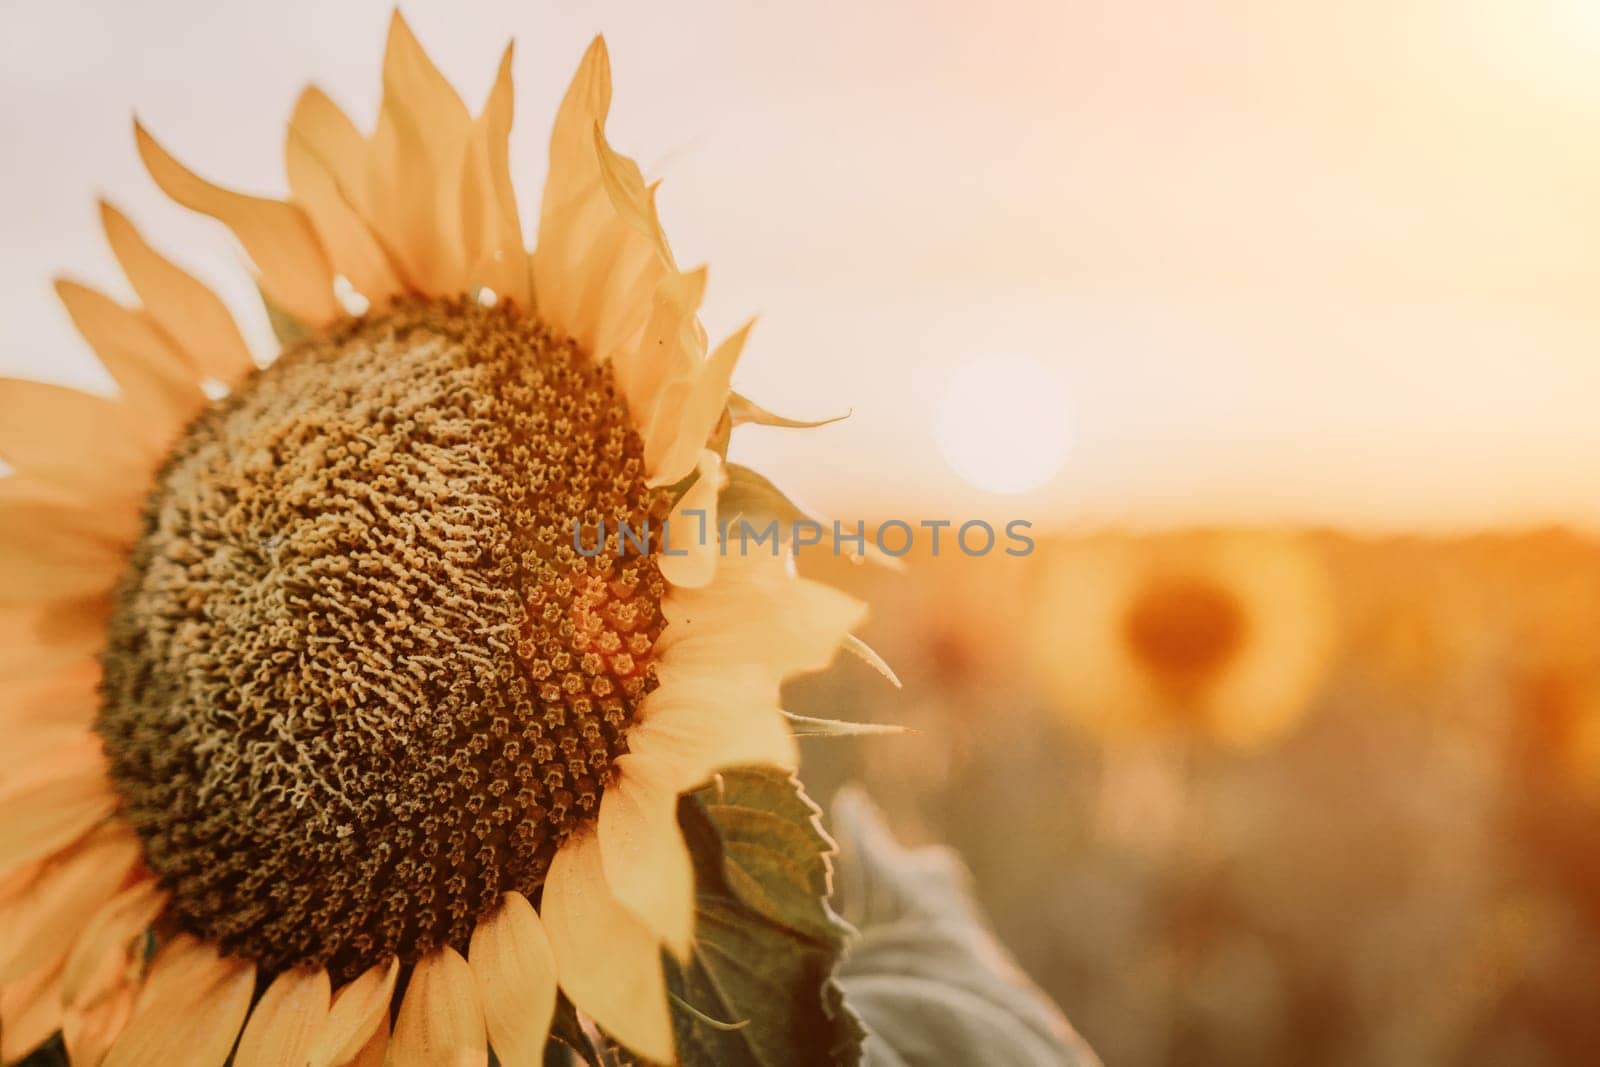 Bright Sunflower Flower: Close-up of a sunflower in full bloom, creating a natural abstract background. Summer time. Field of sunflowers in the warm light of the setting sun. Helianthus annuus. by panophotograph